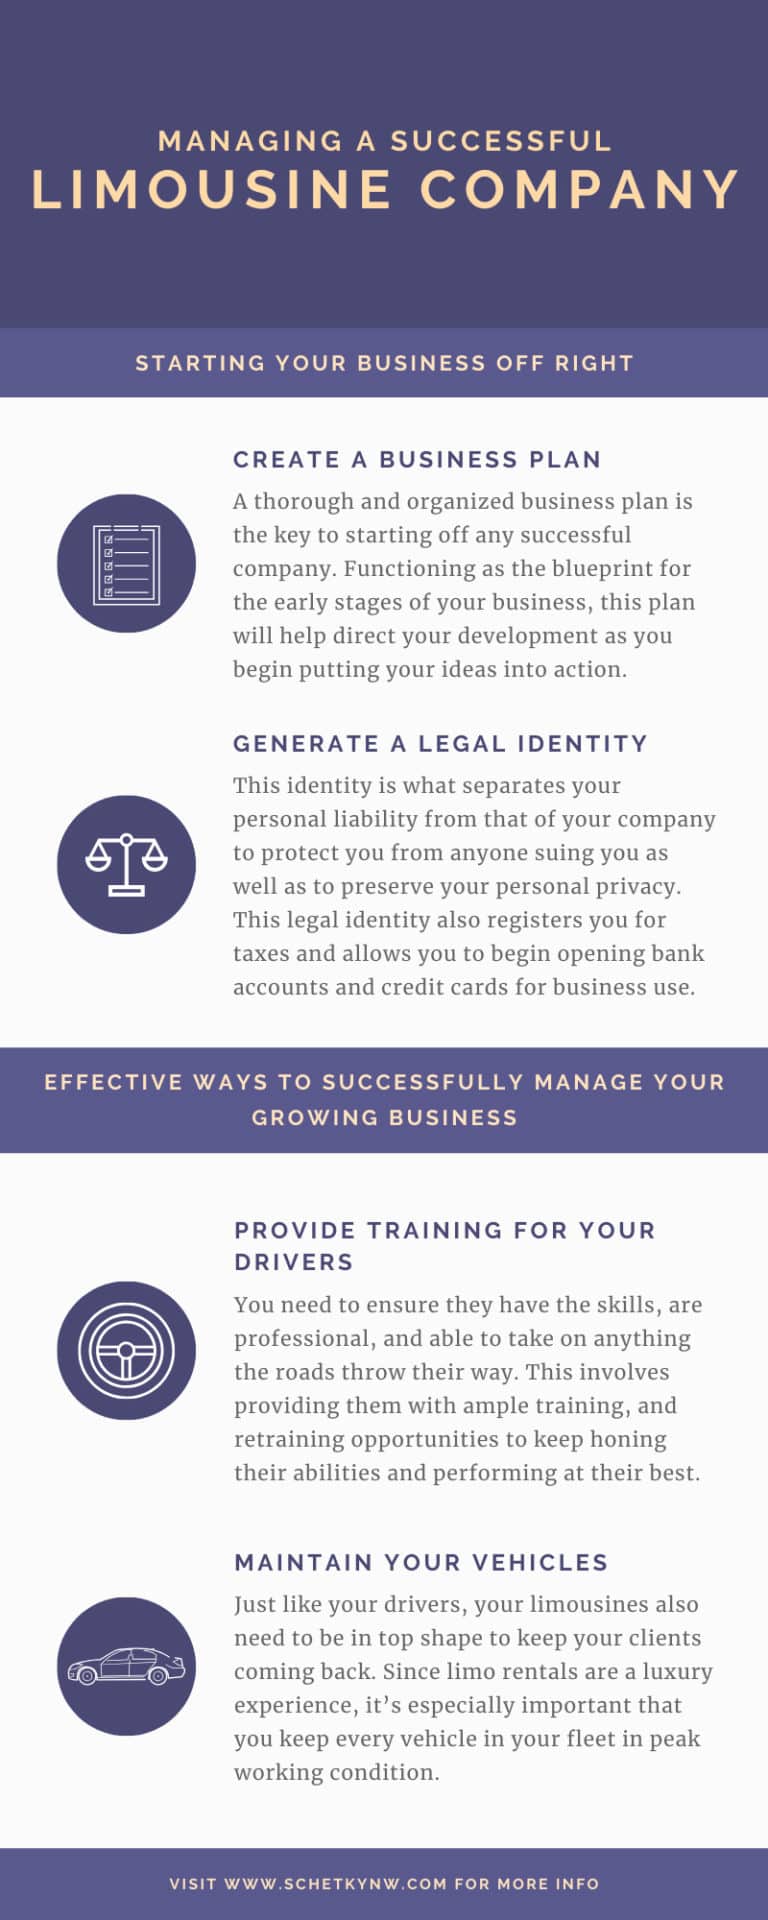 Managing a Successful Limousine Company infographic